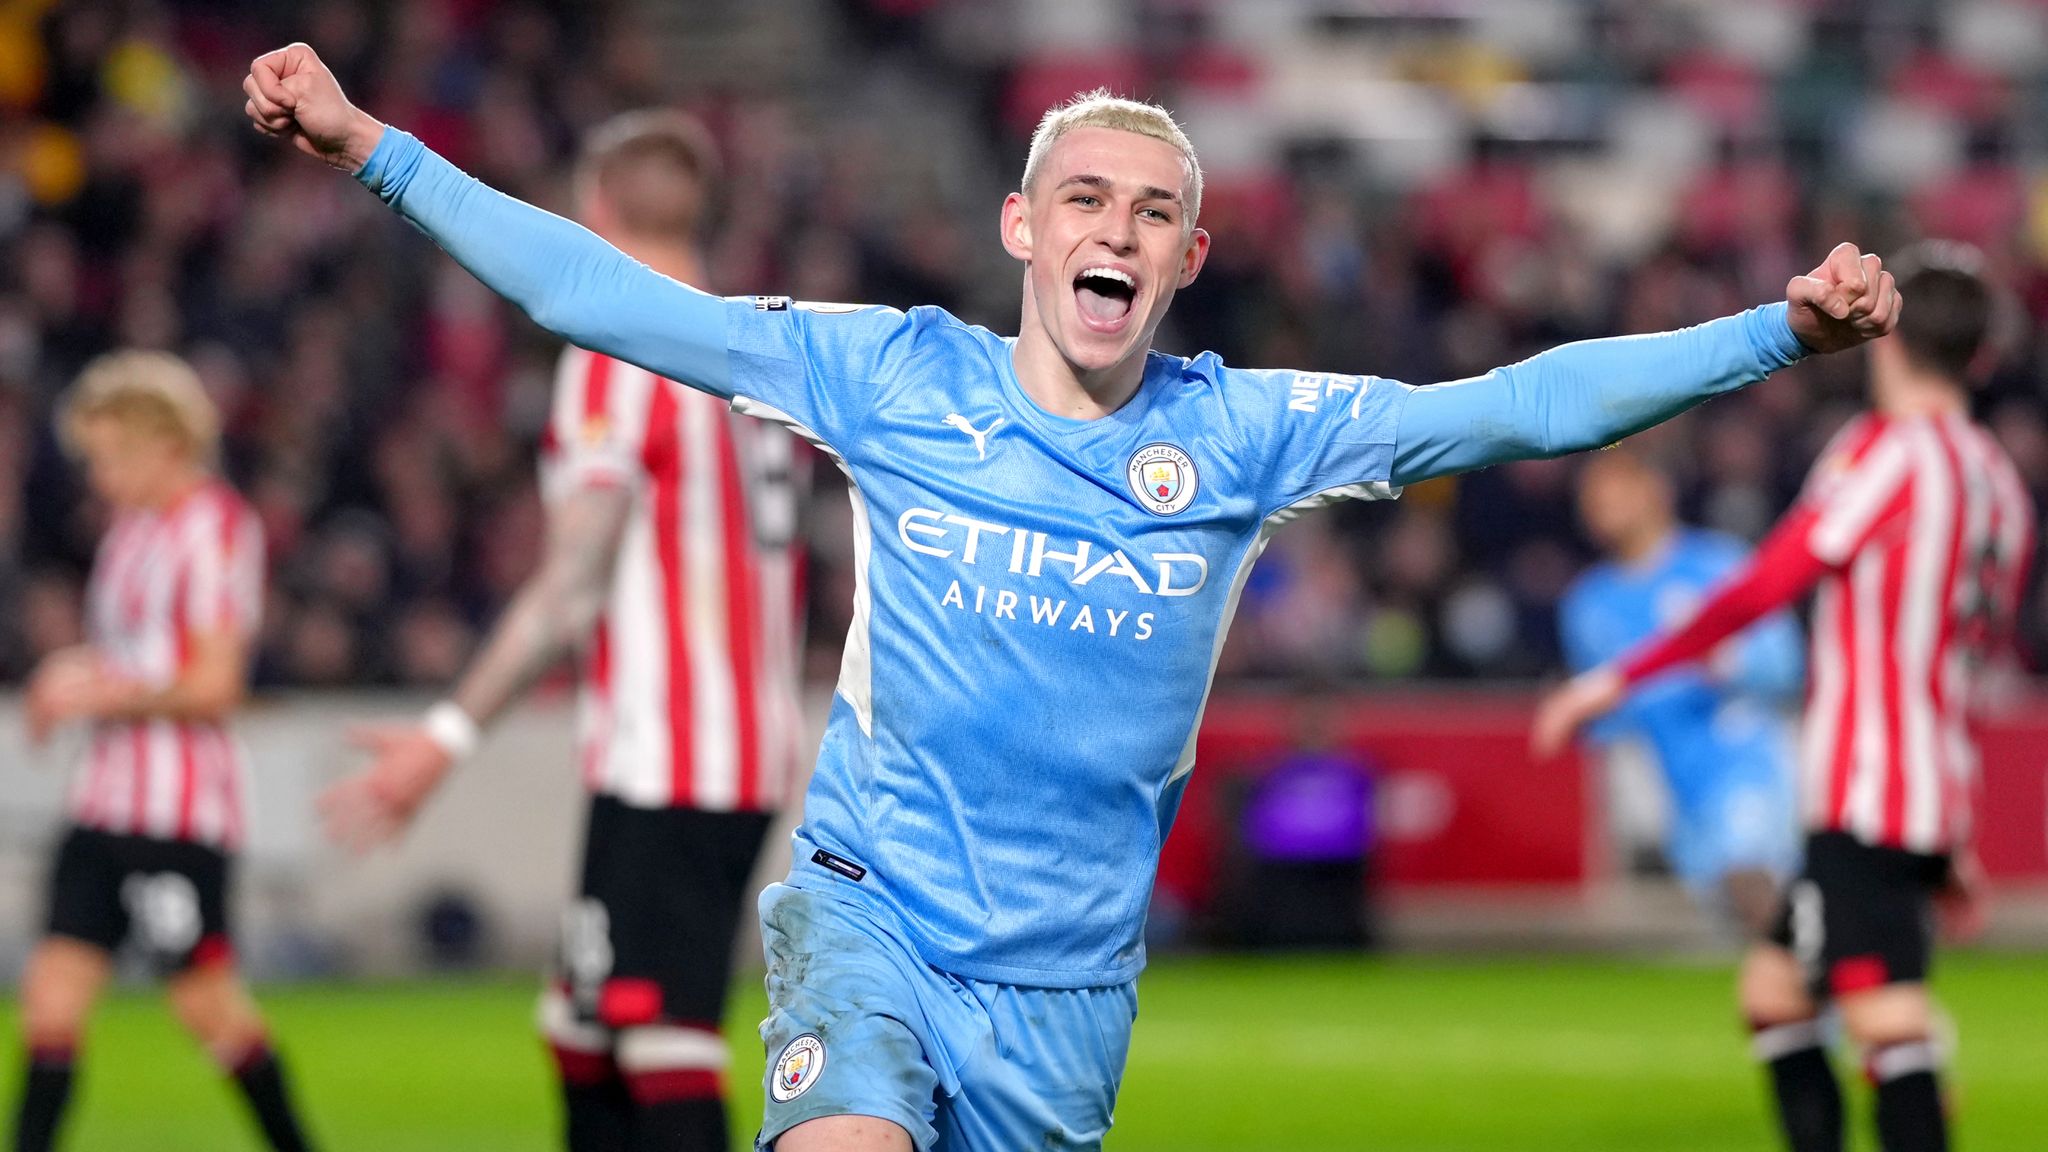 Brentford 0-1 Manchester City: Is the Premier League title race over? As City go eight points clear